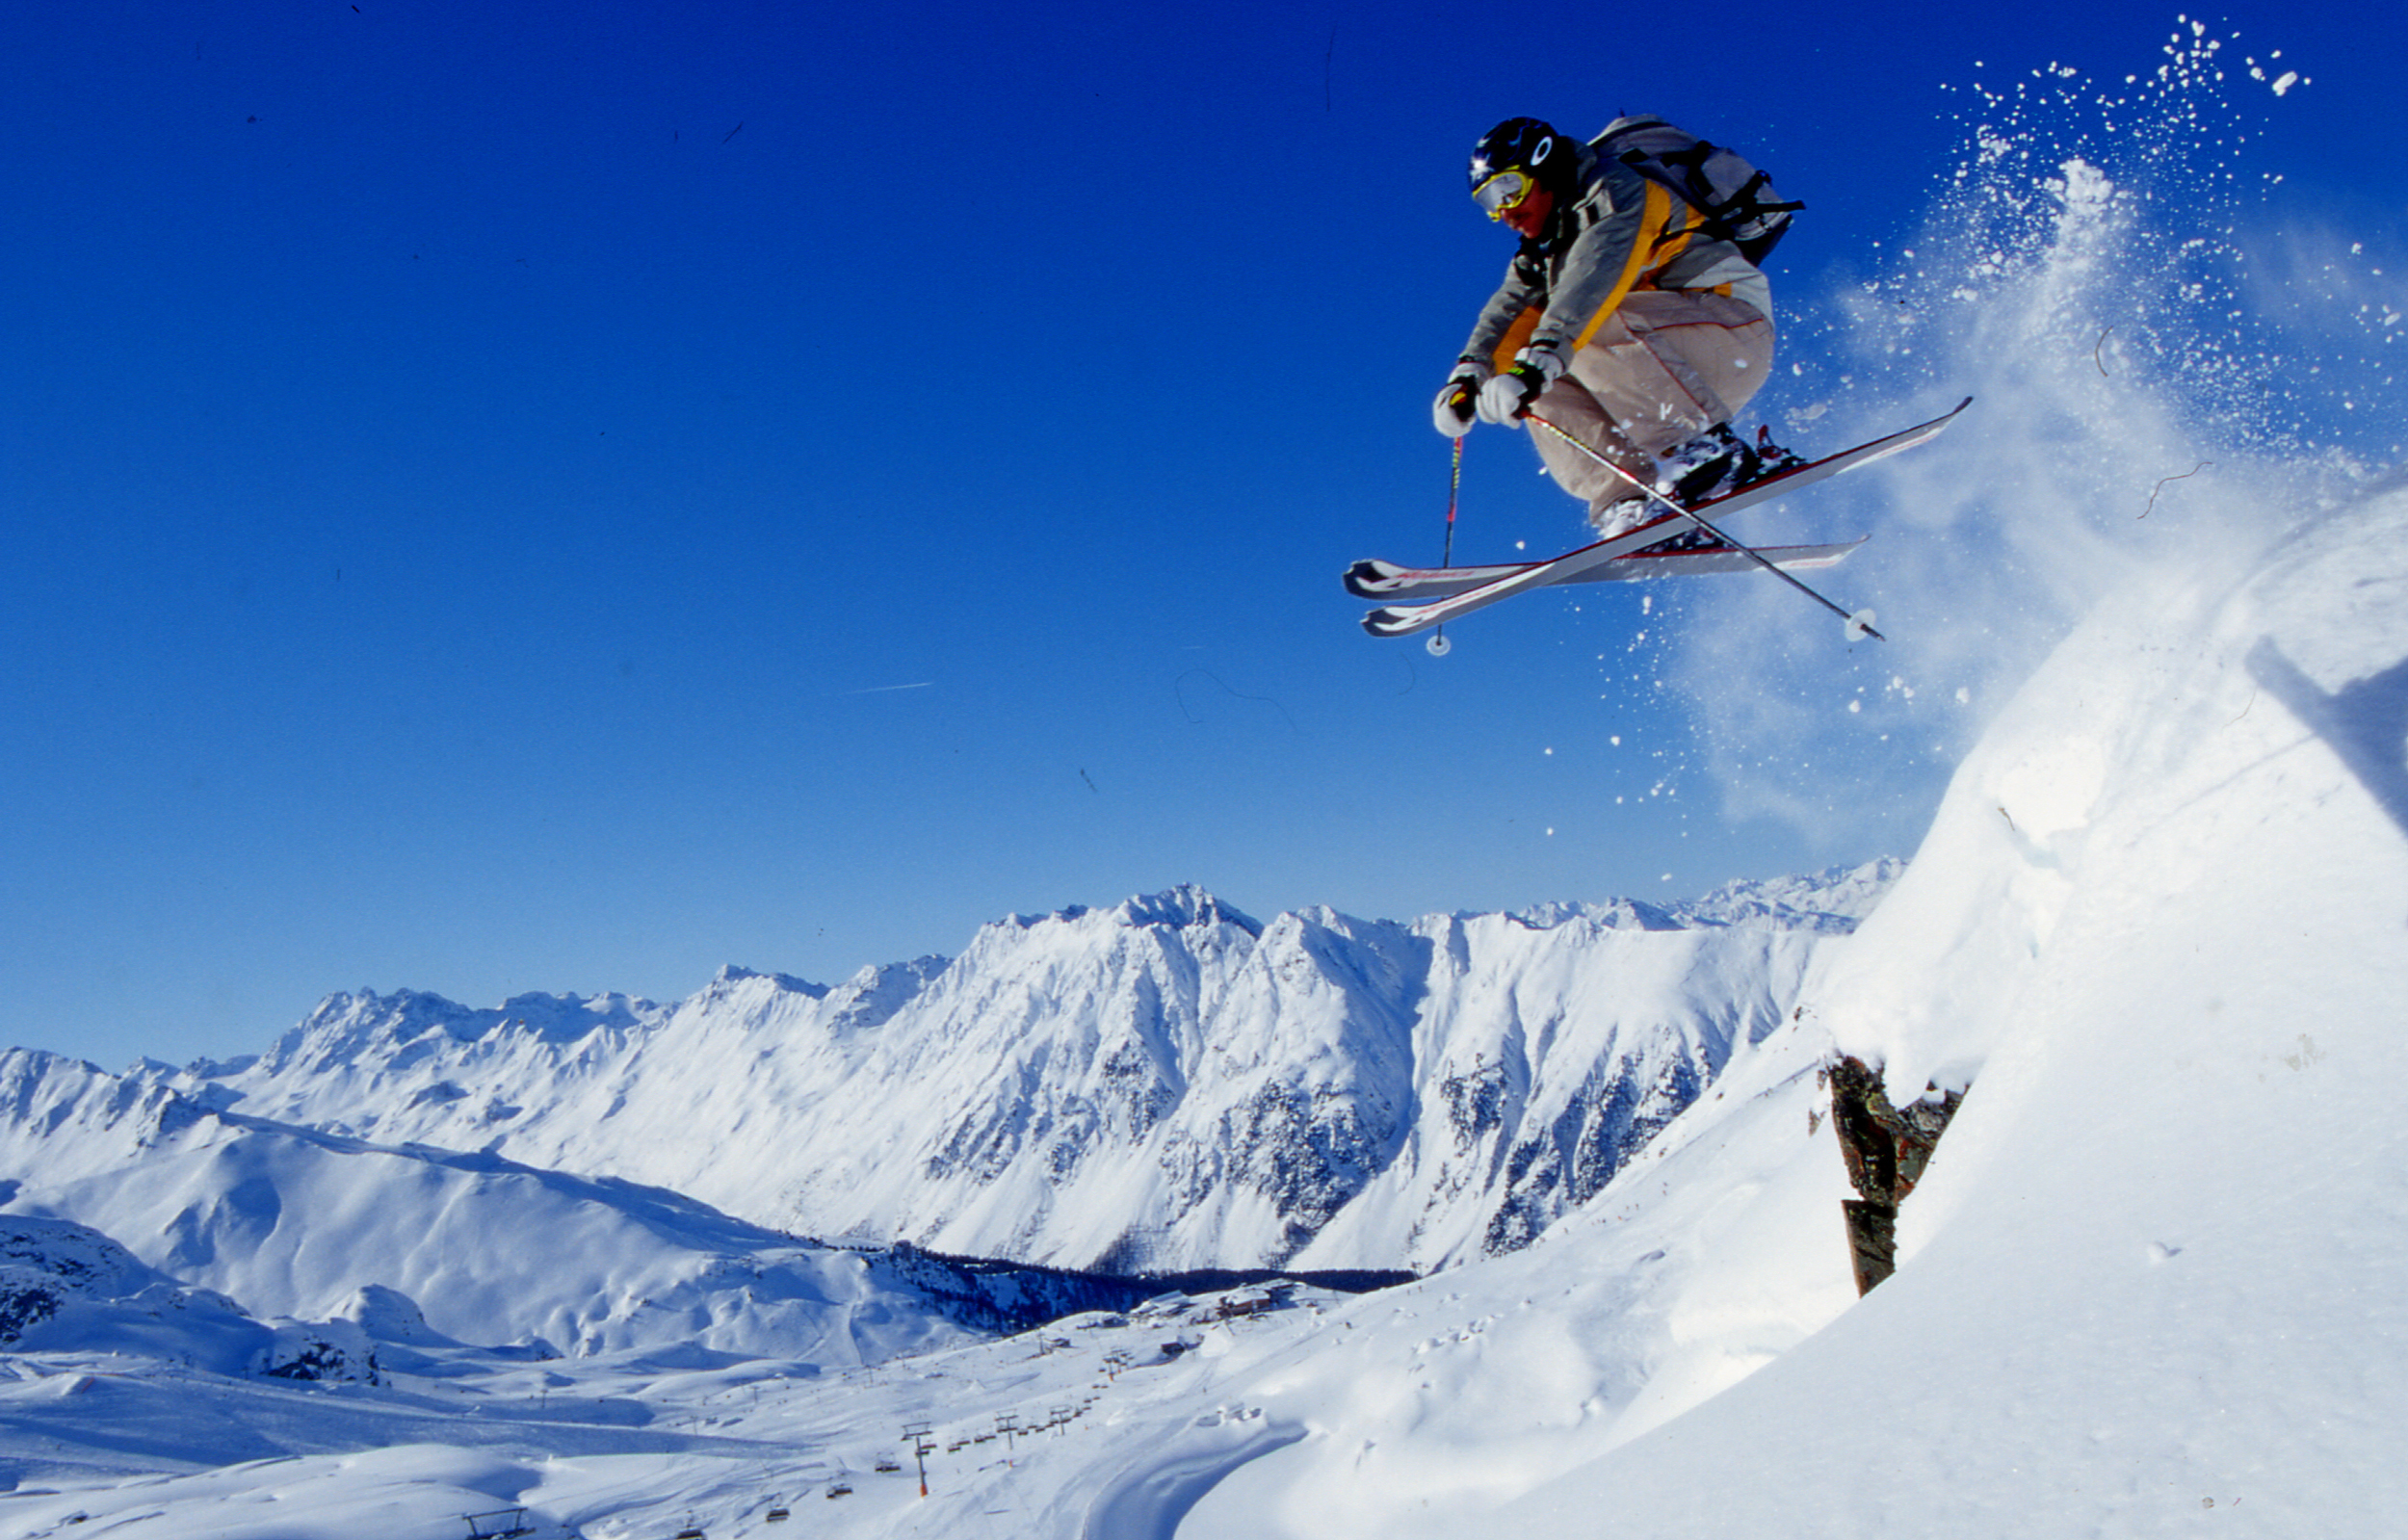 Skiing Wallpapers Images Photos Pictures Backgrounds